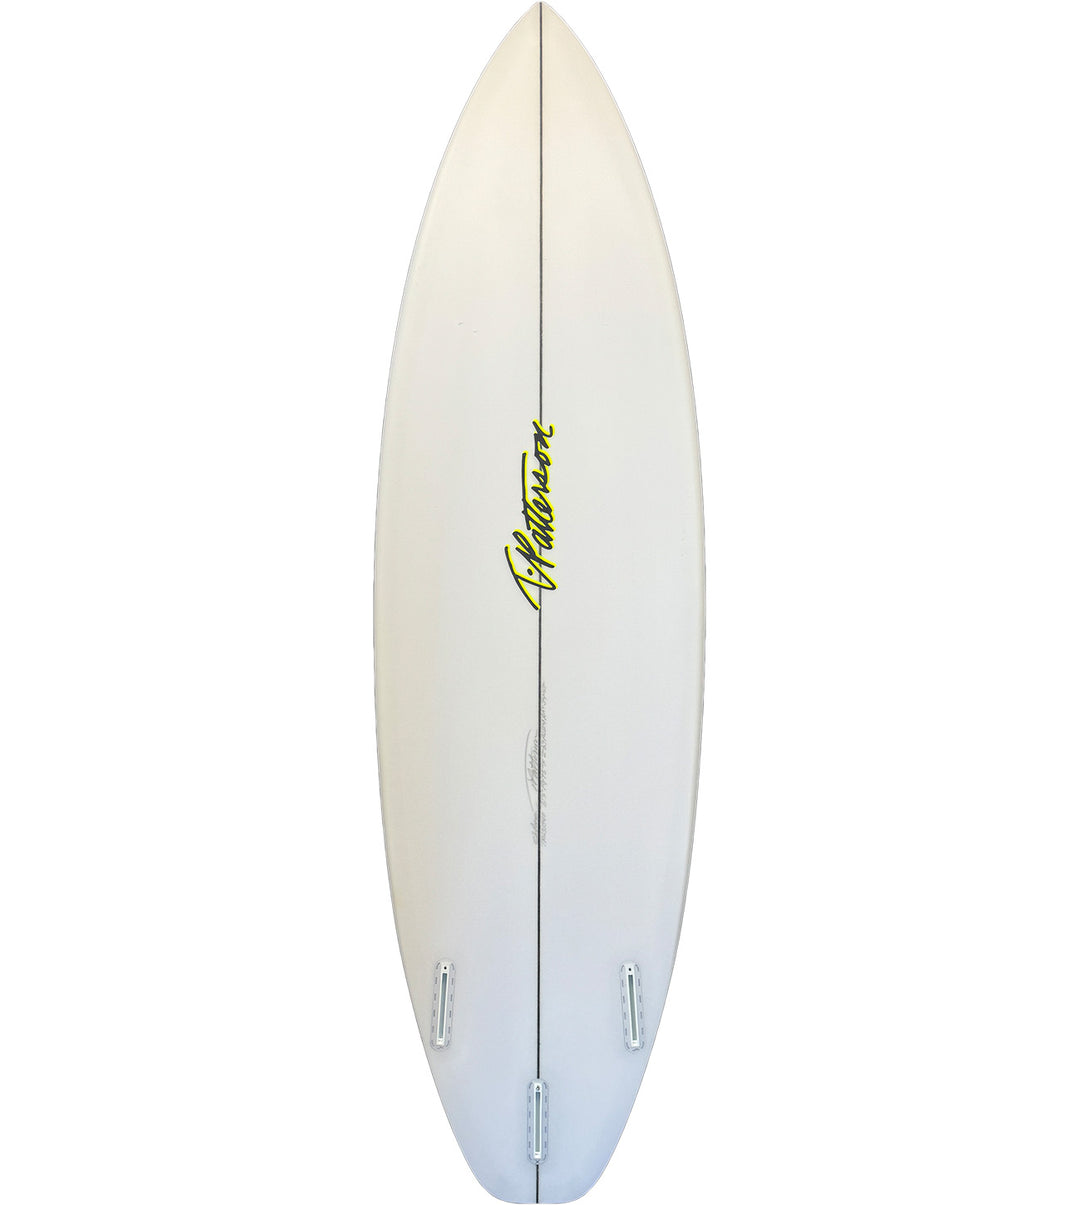 TPatterson Surfboard
Alley Rat/Futures 6'3 #TPS231340